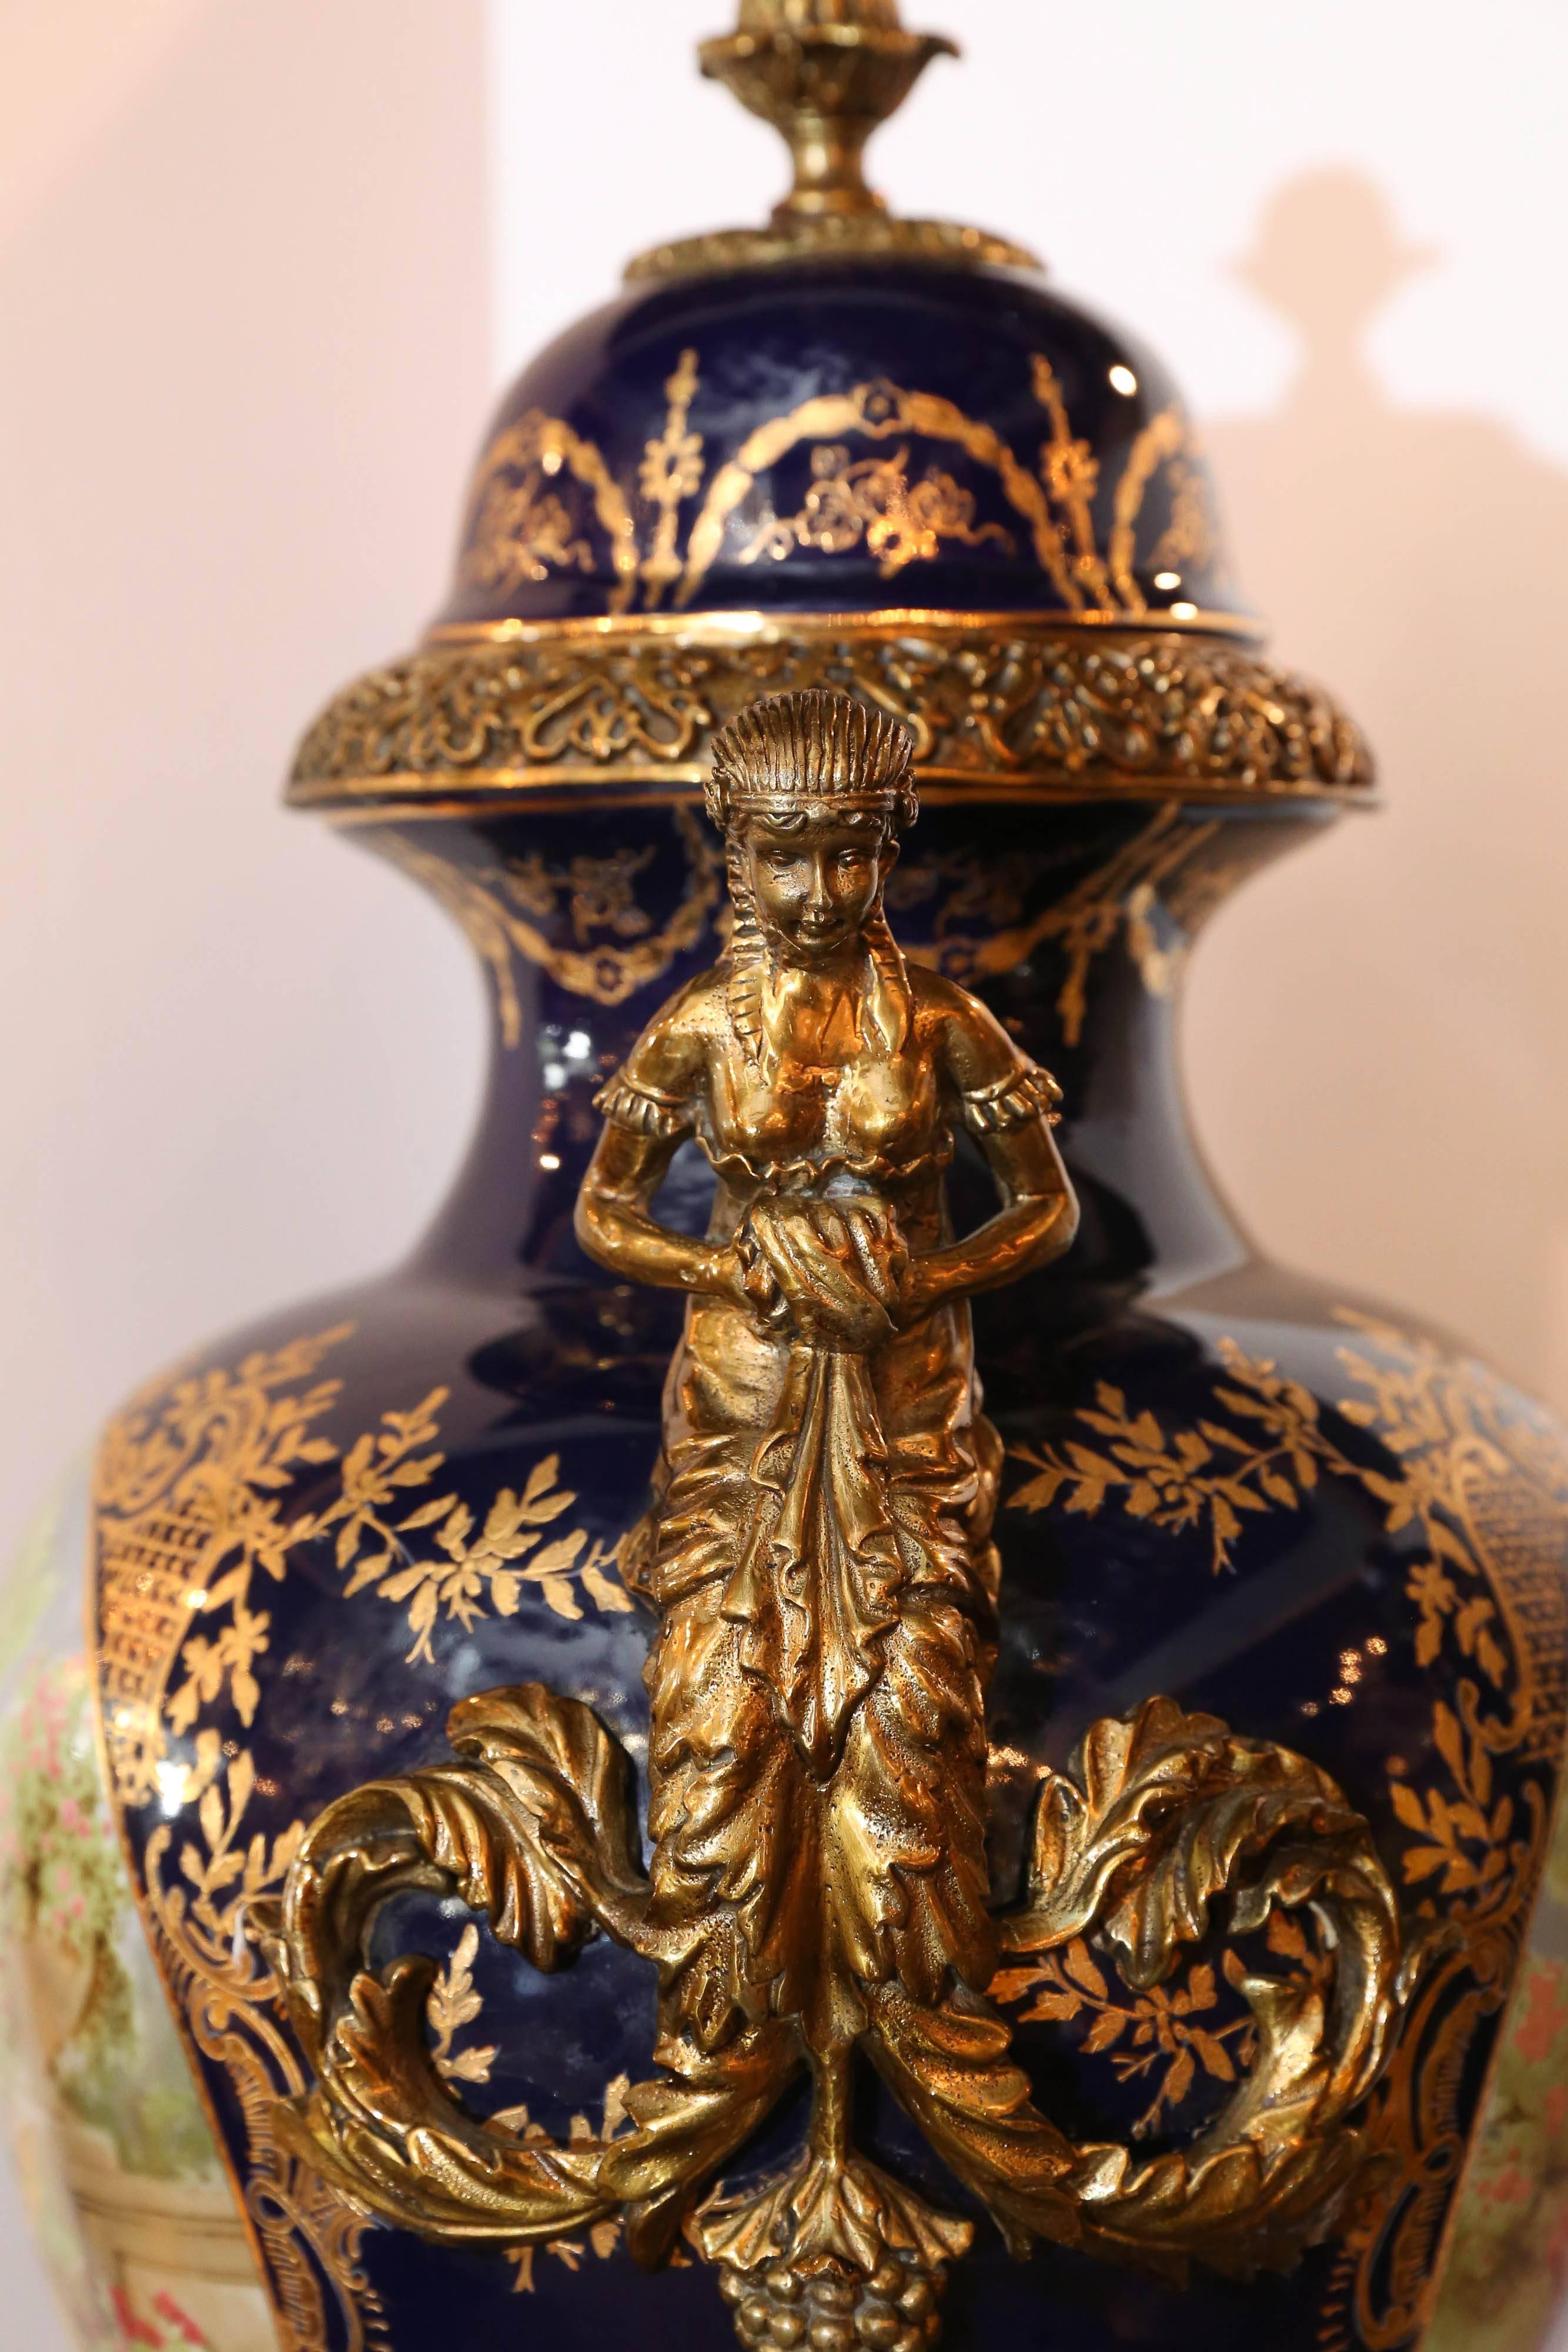 20th Century Pair of Large Porcelain Lidded Urns, Bronze Mounted and Gilt Decorated